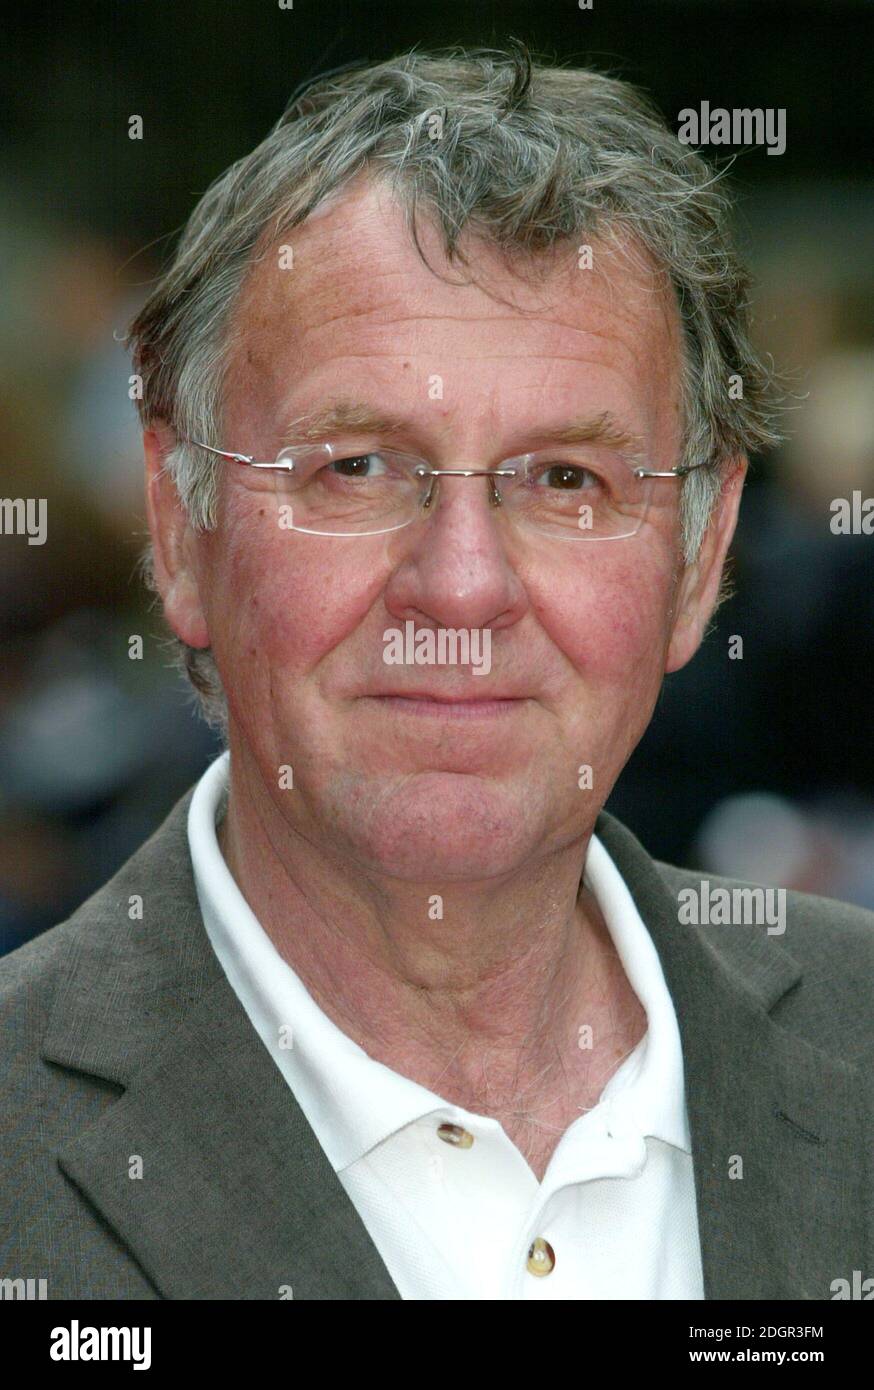 Tom Wilkinson at the European premiere of Batman Begins, Leicester Square,  London. Doug Peters/ Stock Photo - Alamy